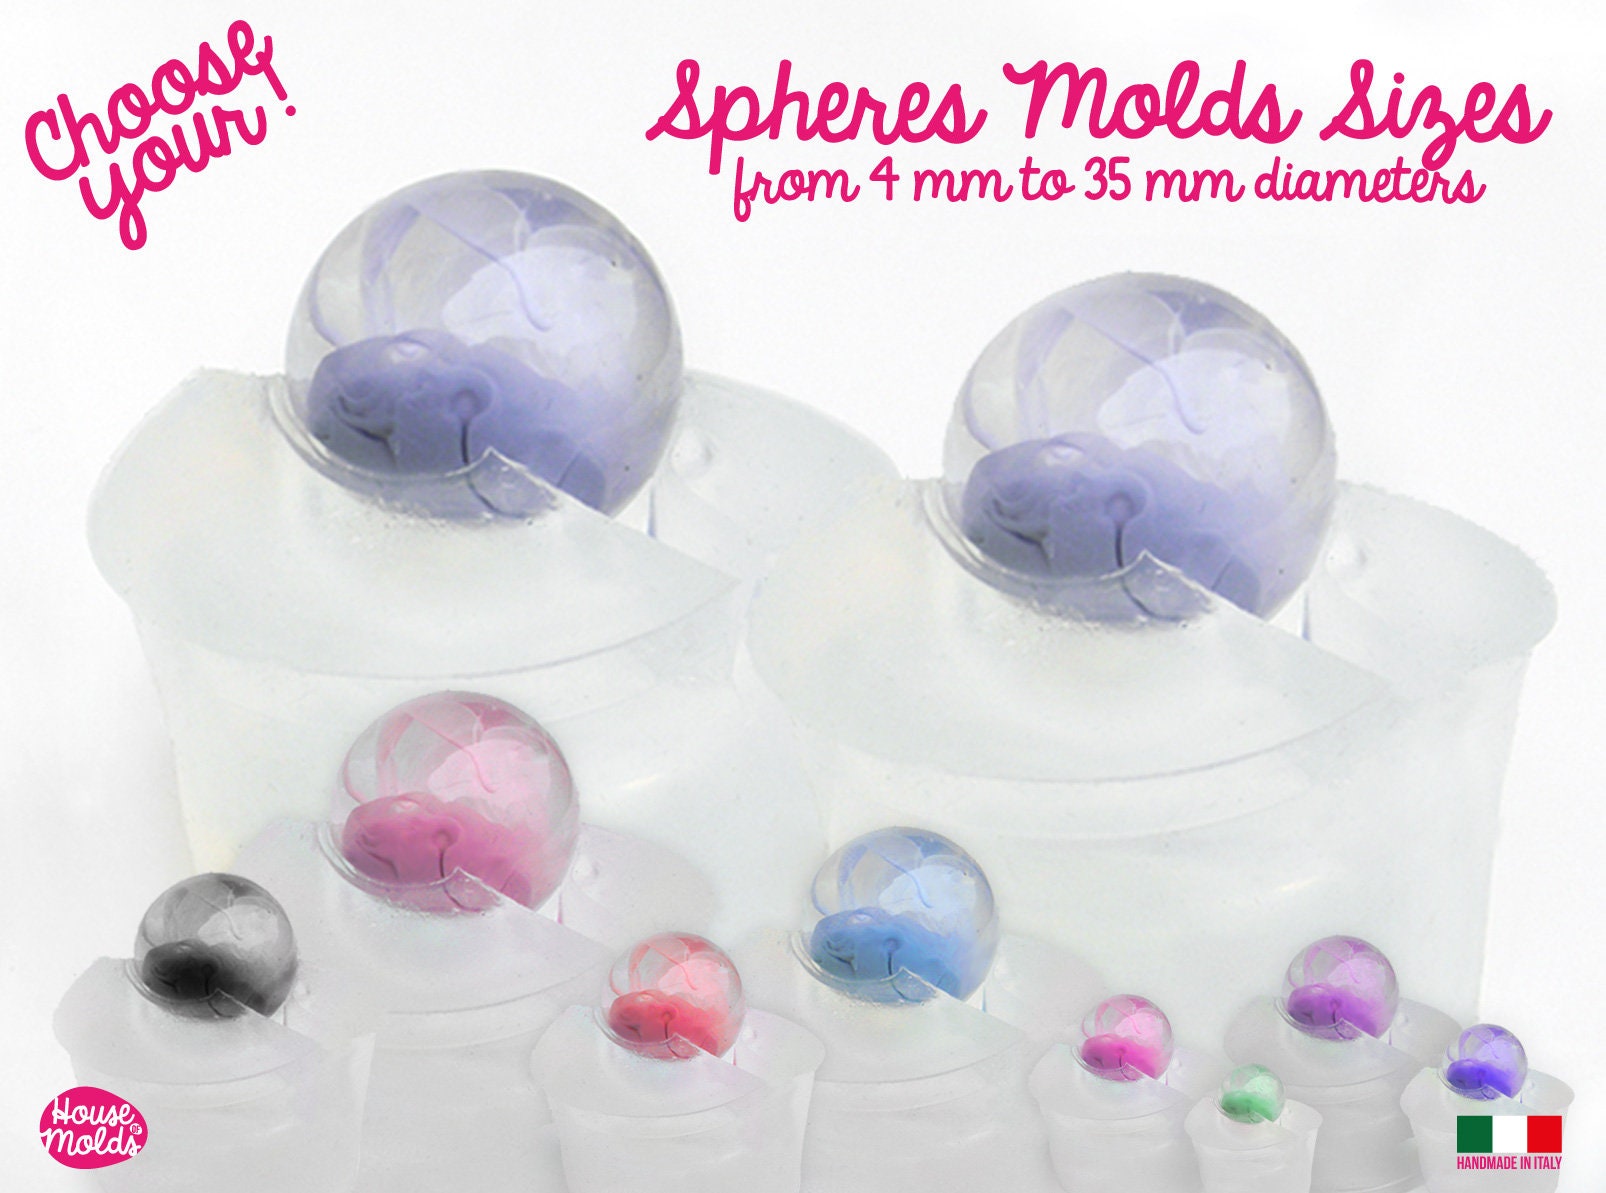 2 Flexible Clear Silicone Molds to Make Smooth Shiny Spheres from 4 Mm to  34 Mm Diameters-choose Your Sphere Size 